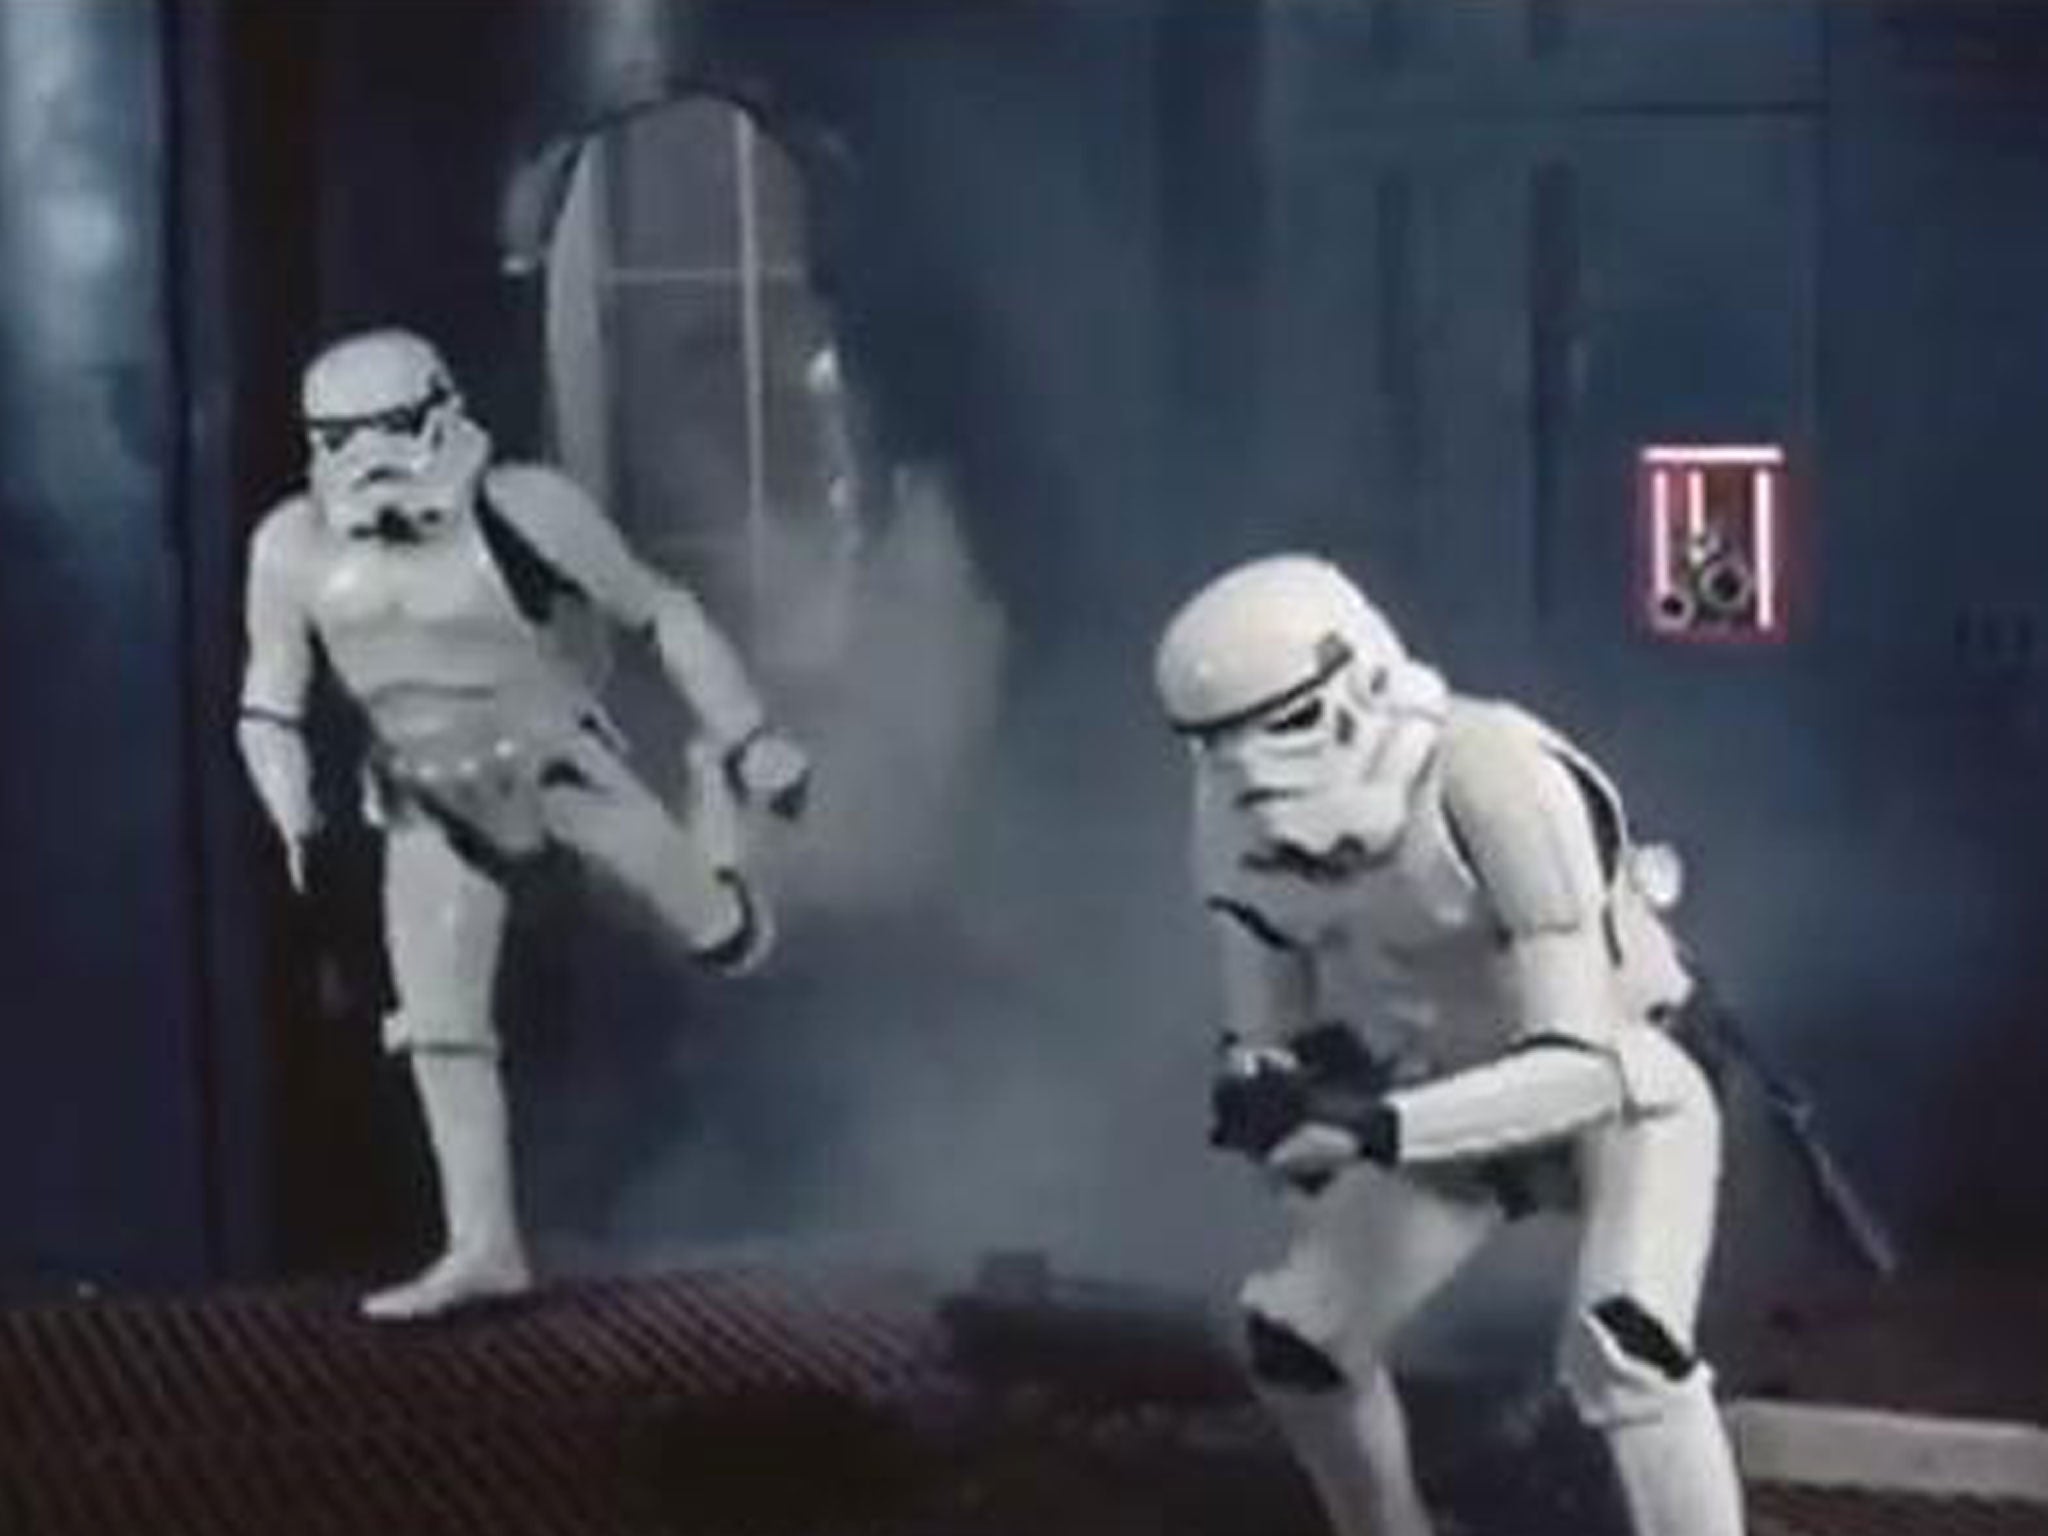 The Stormtroopers have a bit of trouble negotiating a doorway